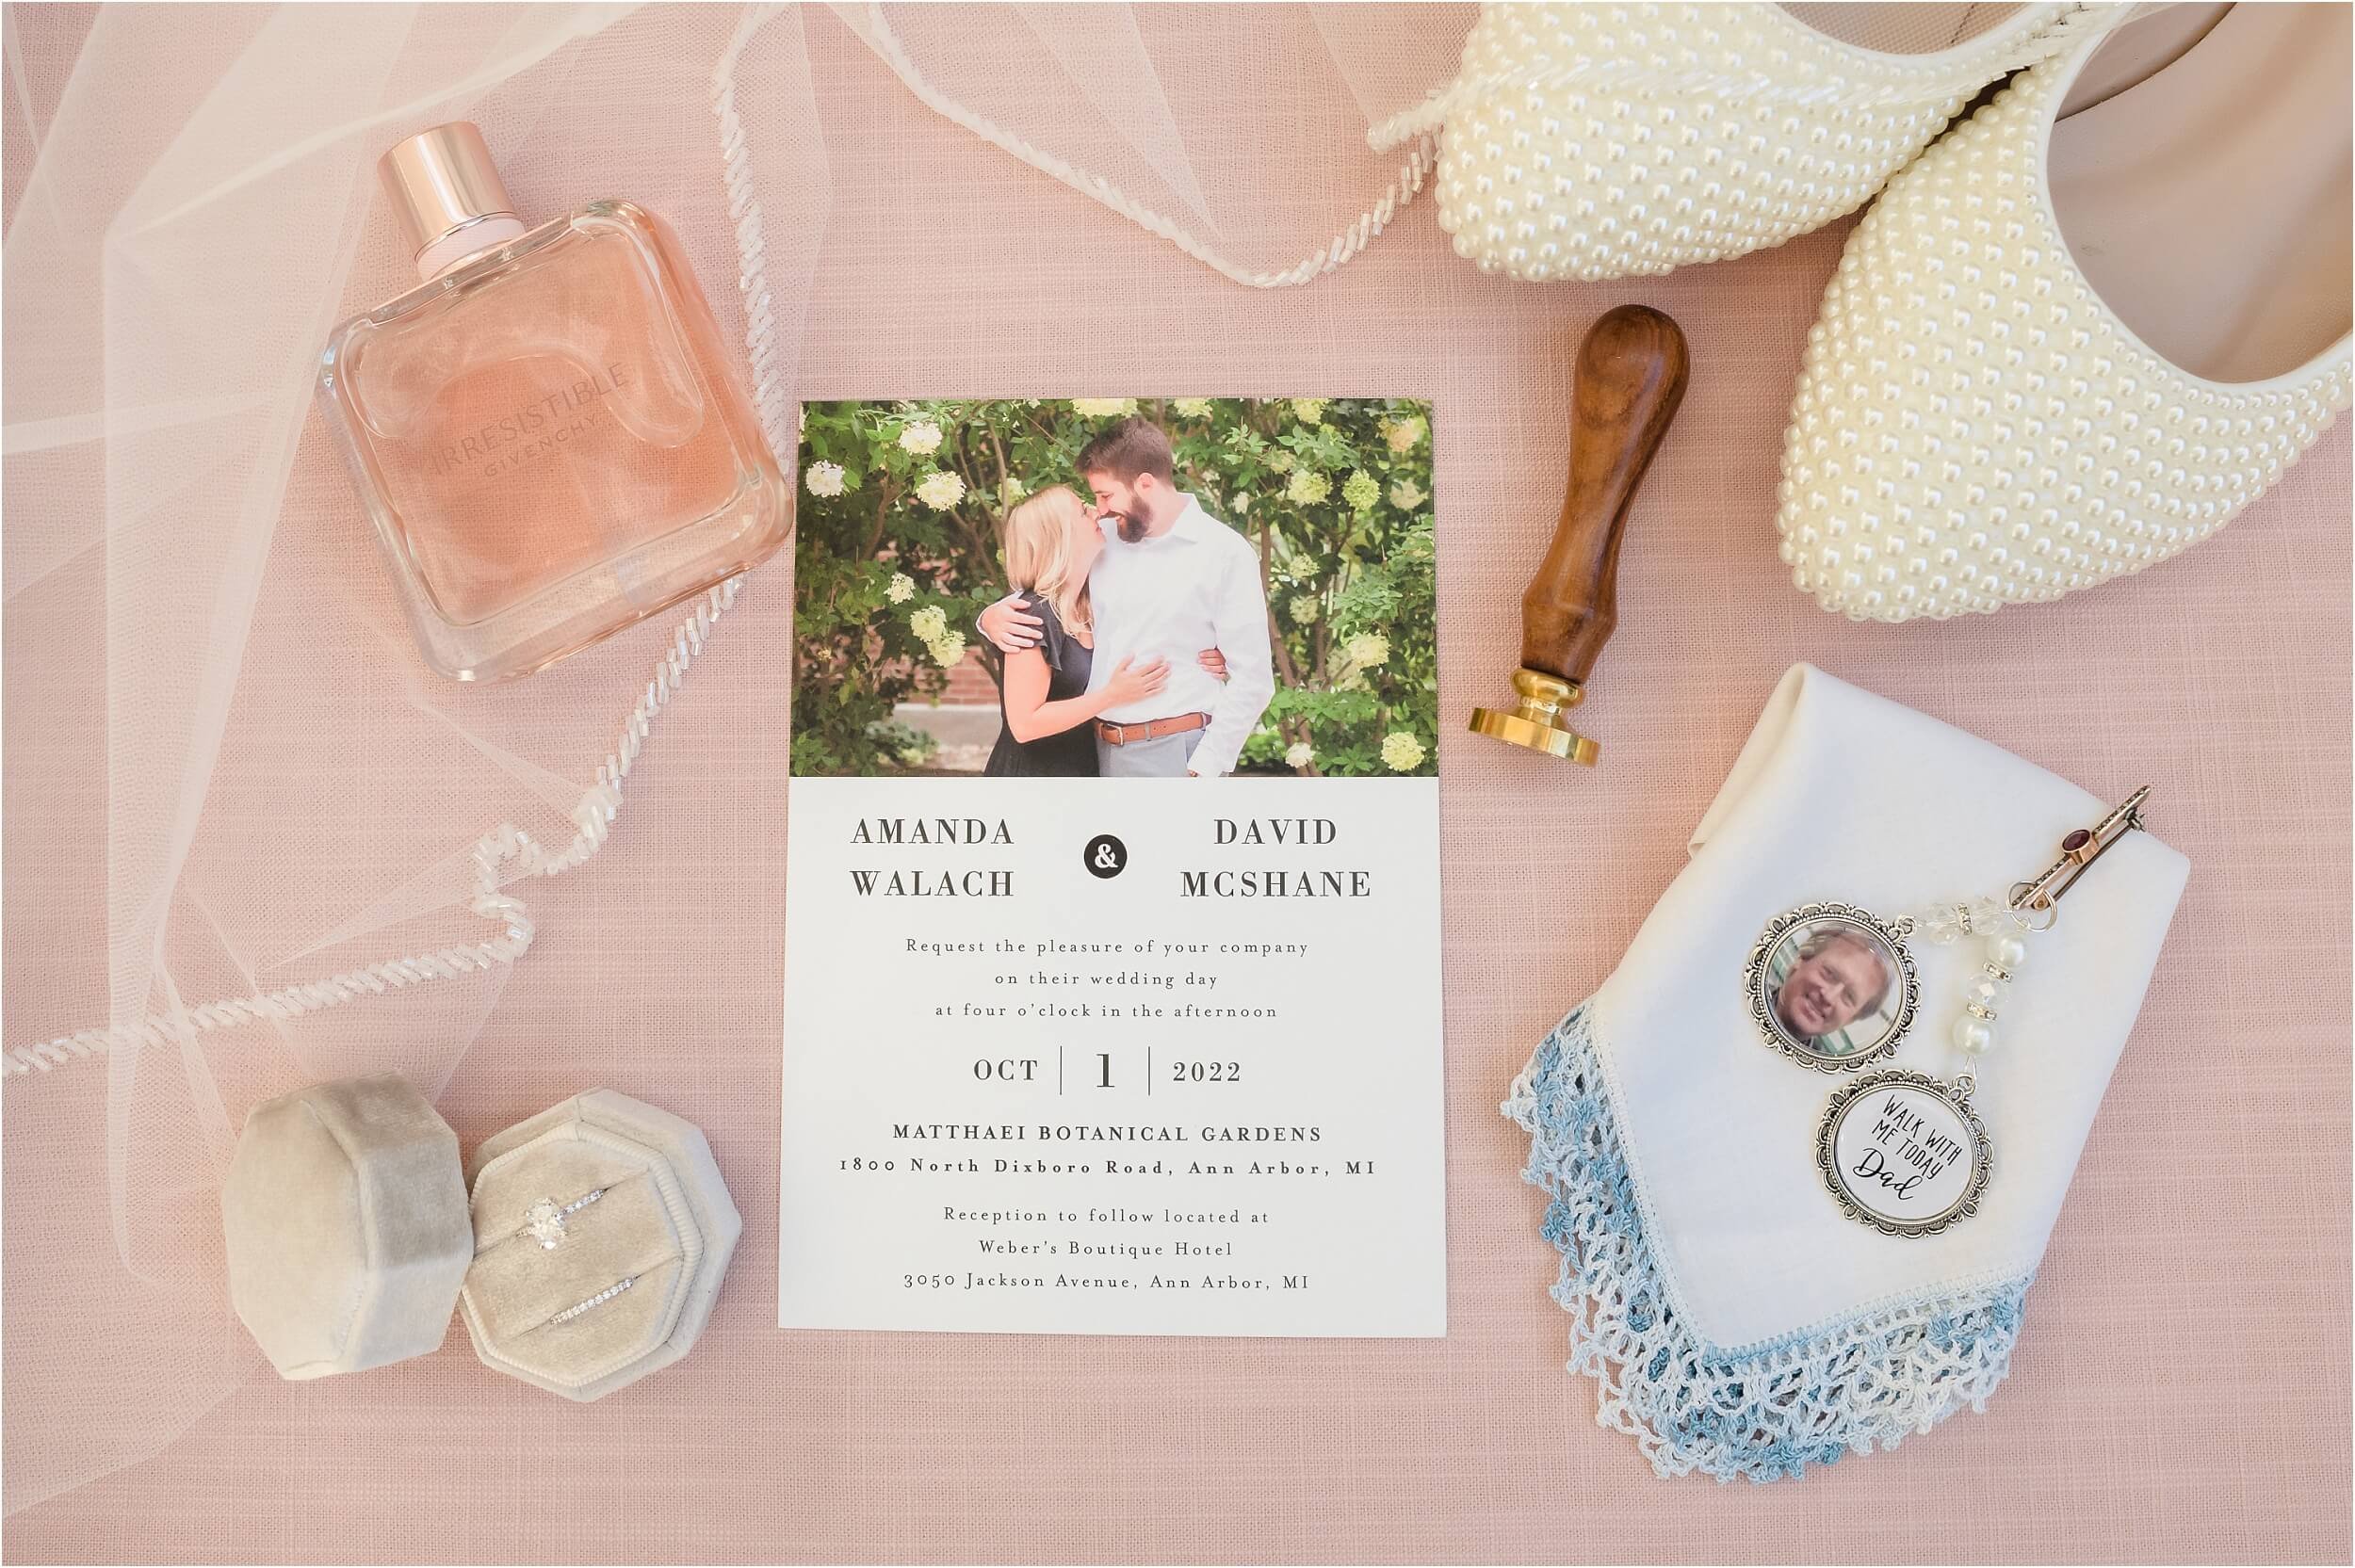  A pink and white layflat of wedding details including shoes, an invite, perfume,  and family mementos.  